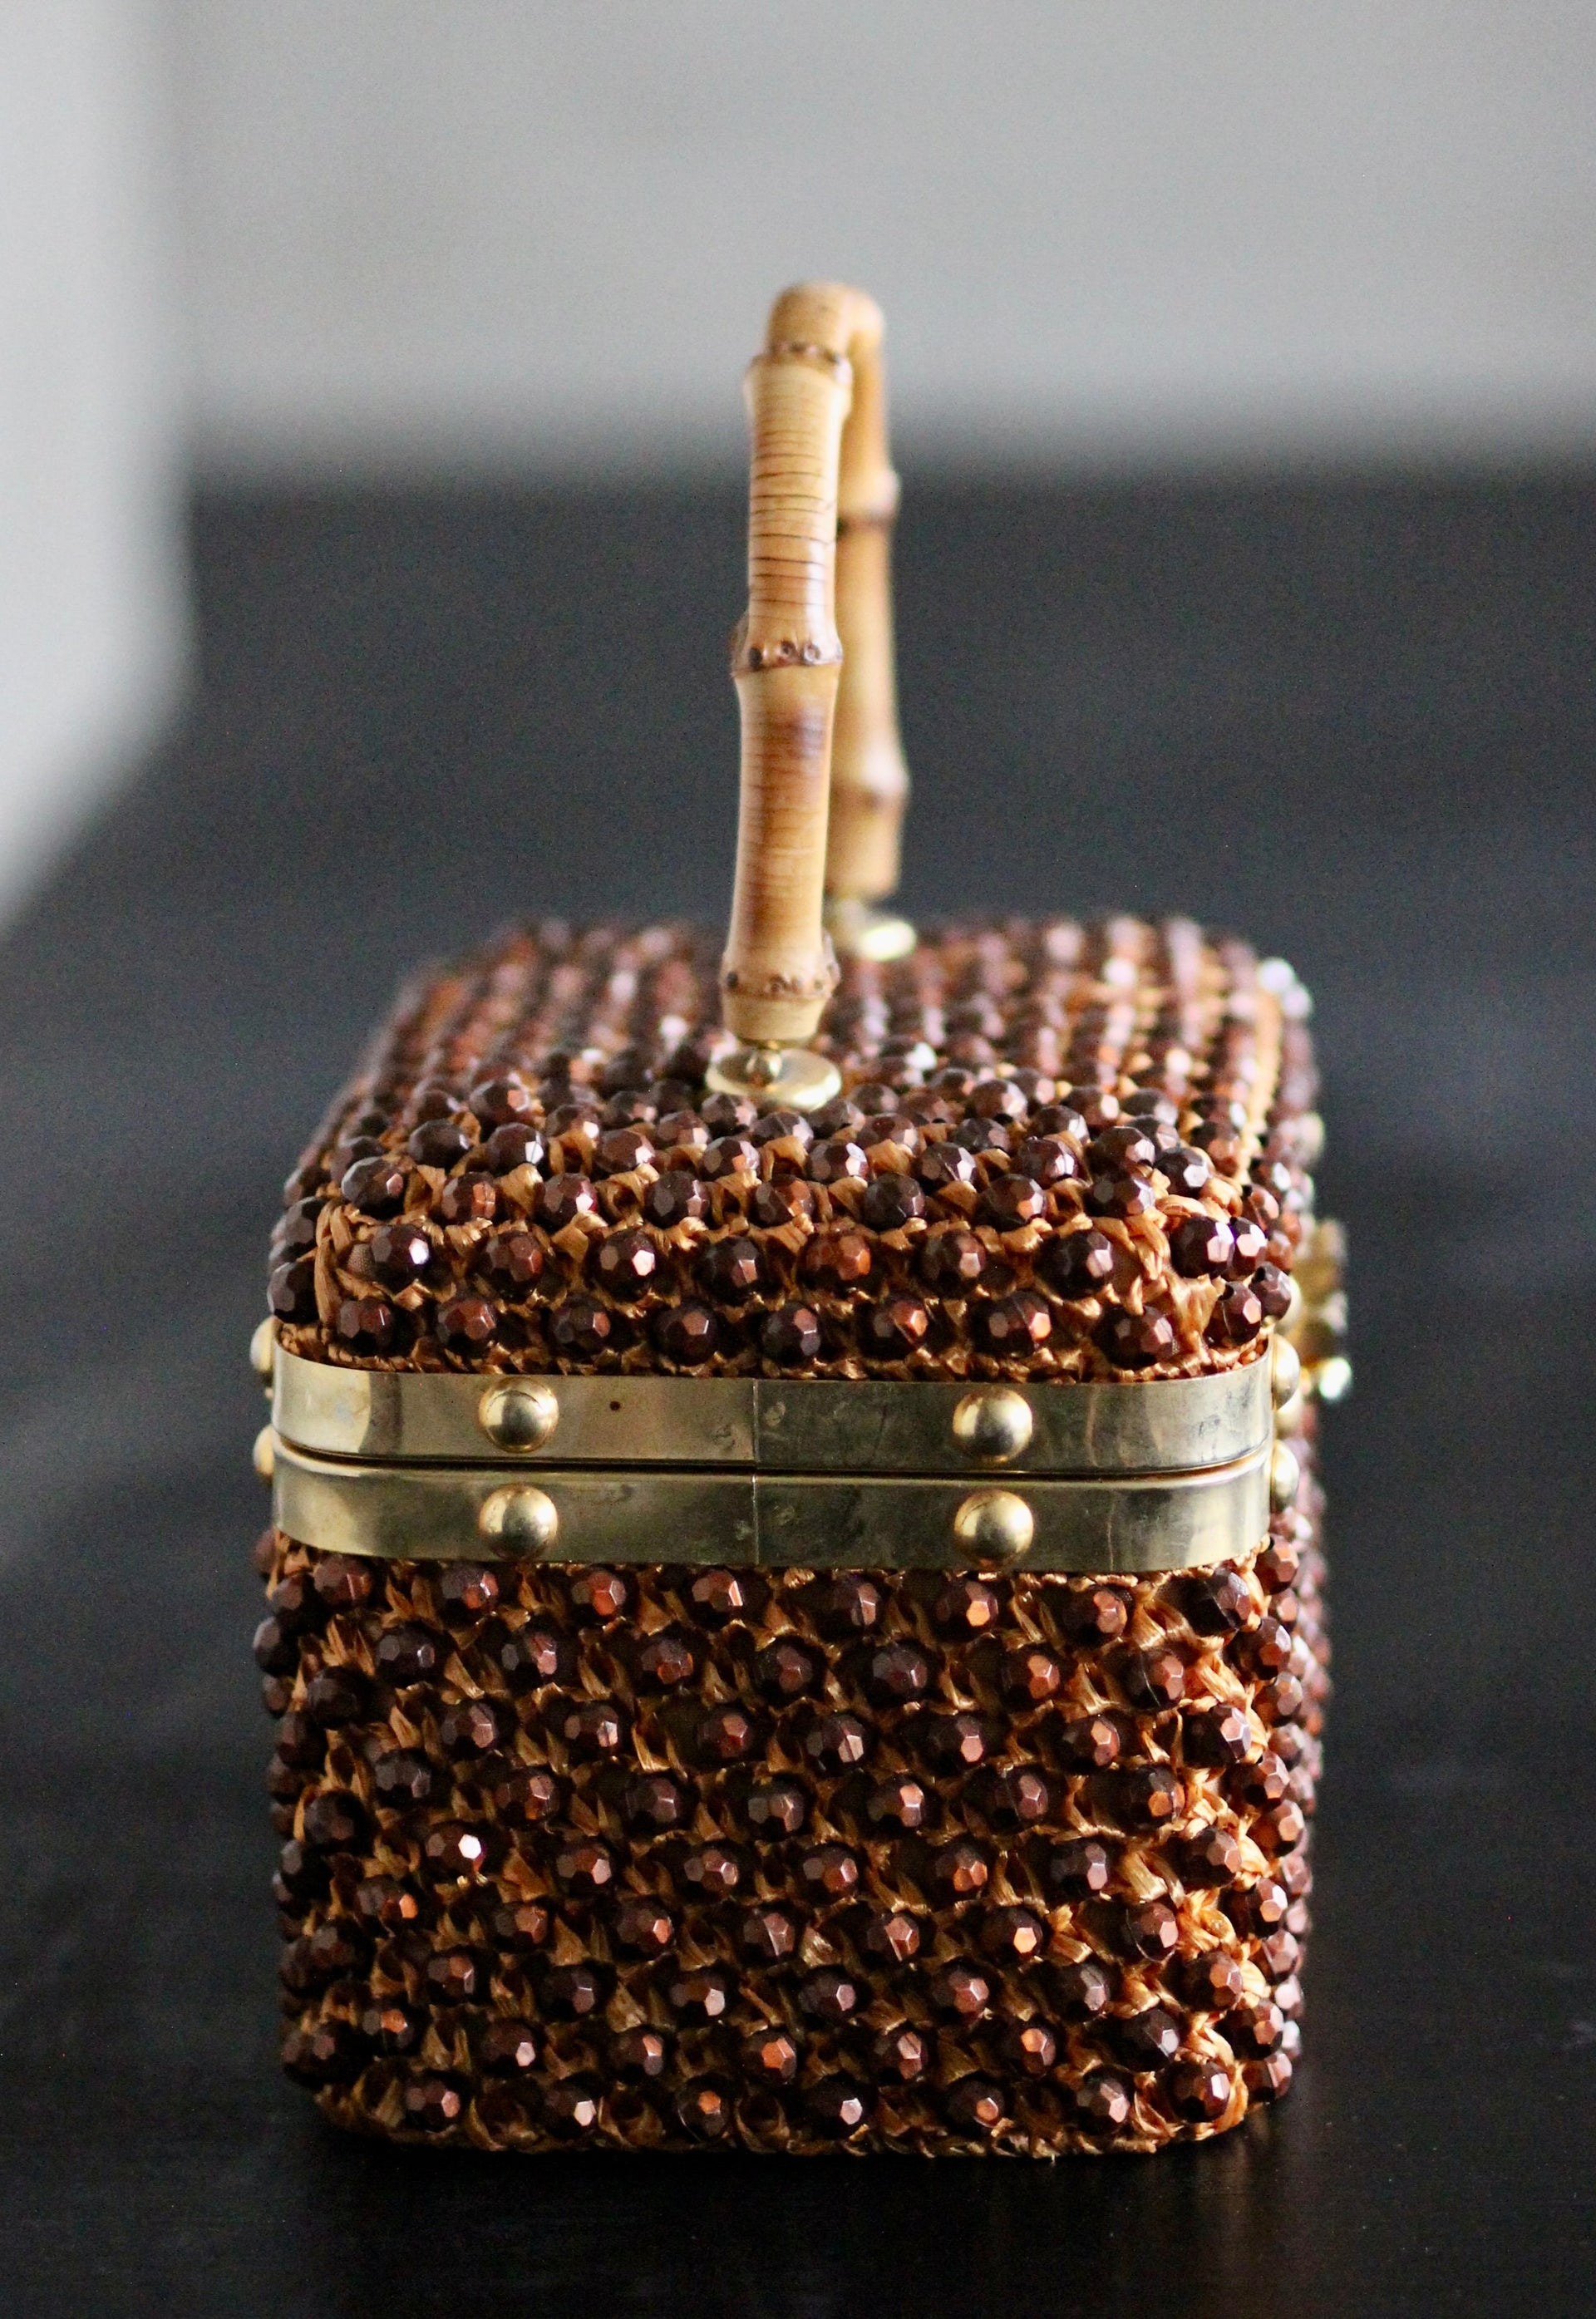 1950s Box Bag with Plastic Beads and Bamboo Handle